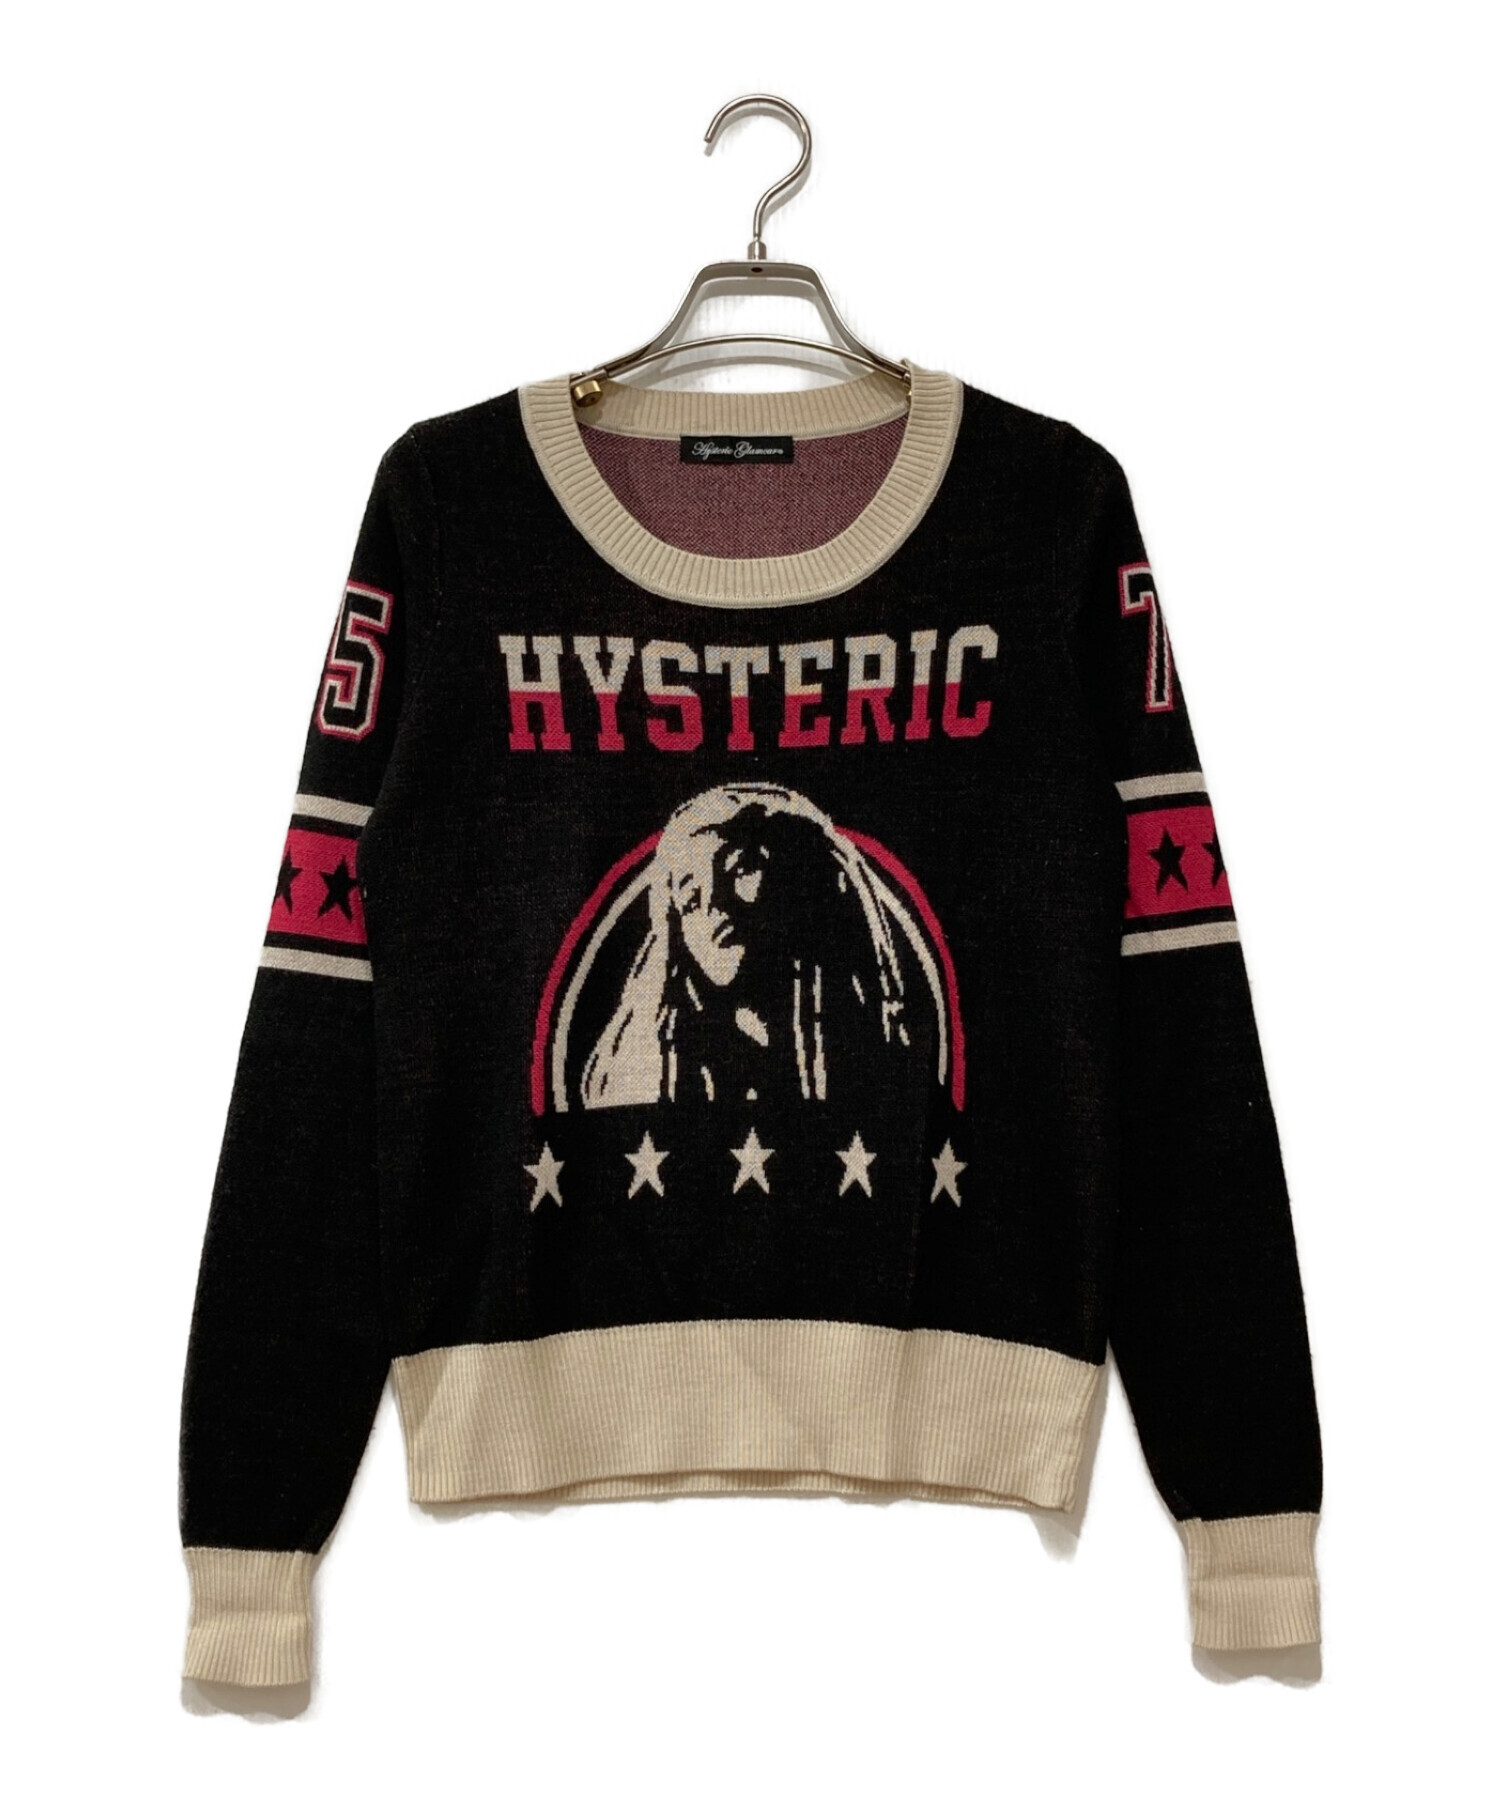 vintage hysteric glamour girl wool knitmxxshop - トップス